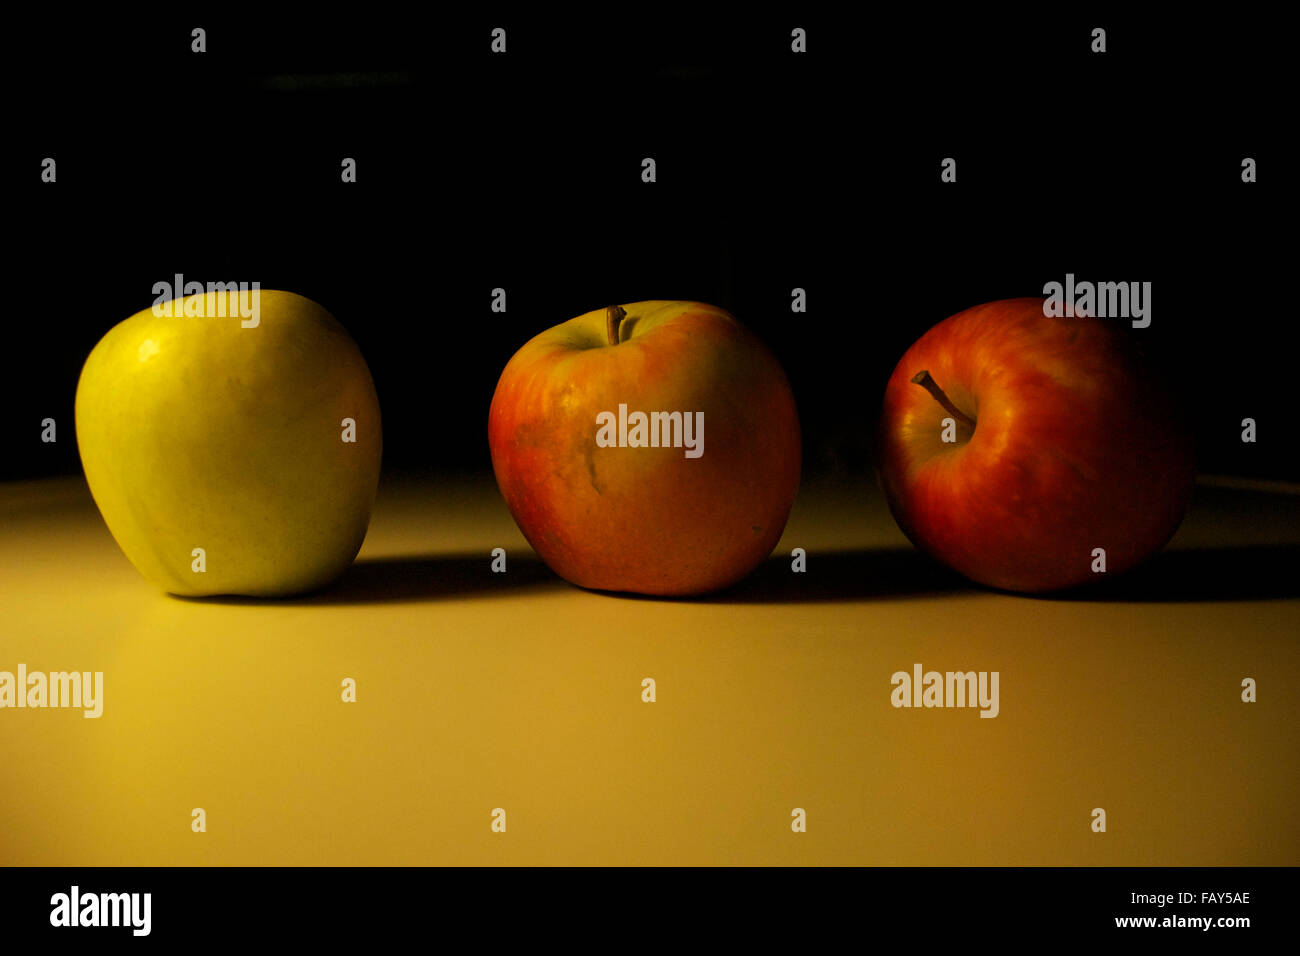 Still life of three different types of apple in a gradient. Stock Photo